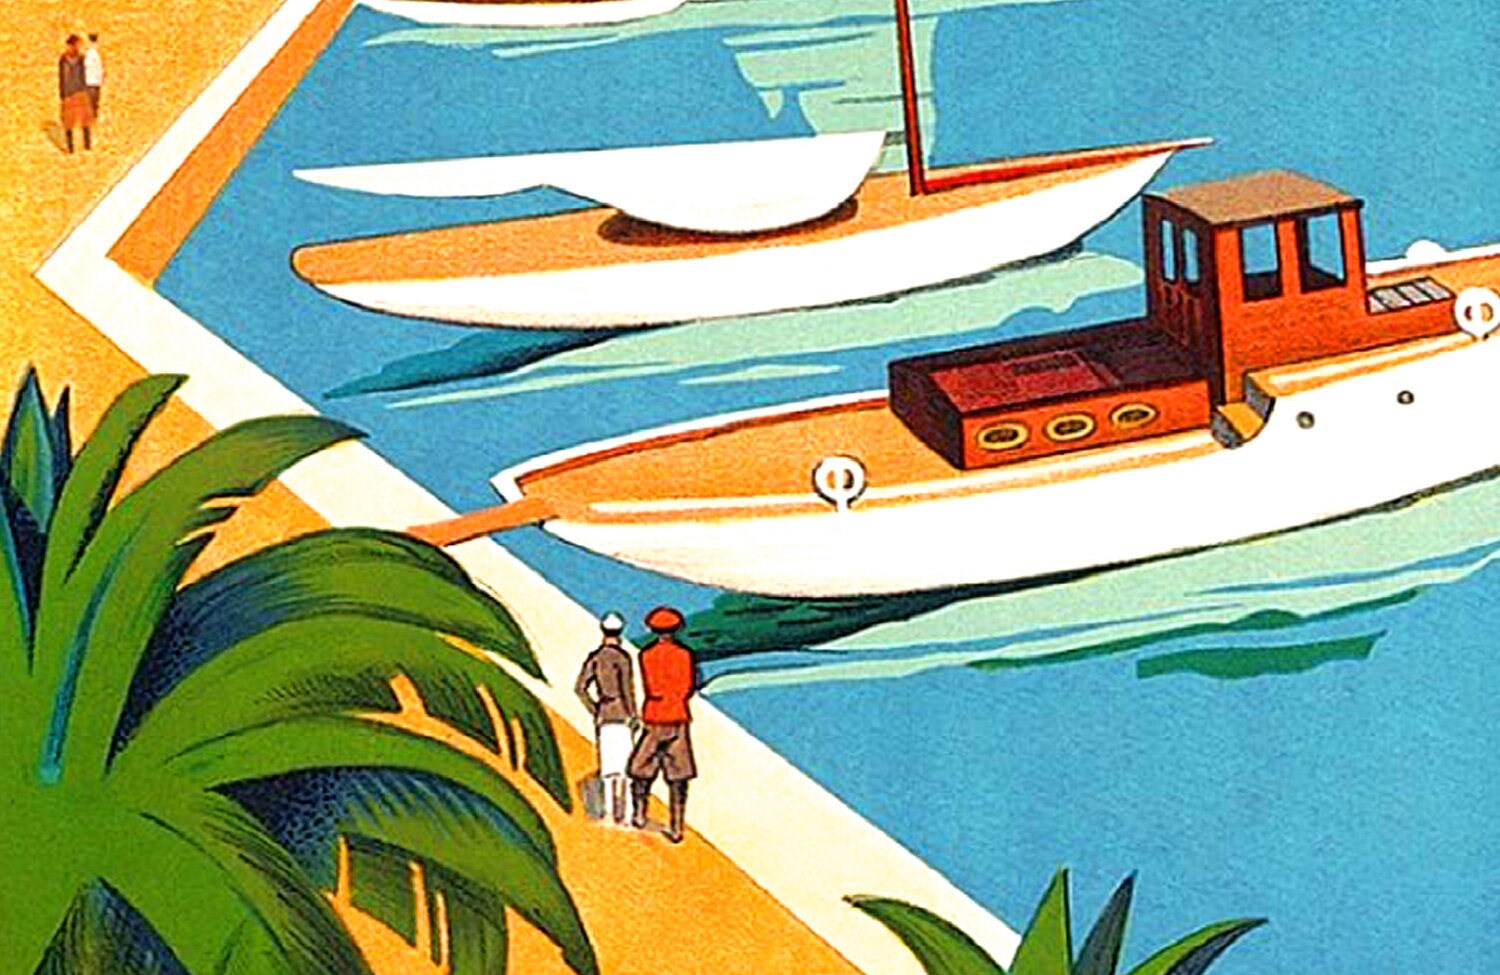 St Barts Tropical Beach Travel Poster Roger Broders Repro Caribbean Art  Print 313 - Etsy